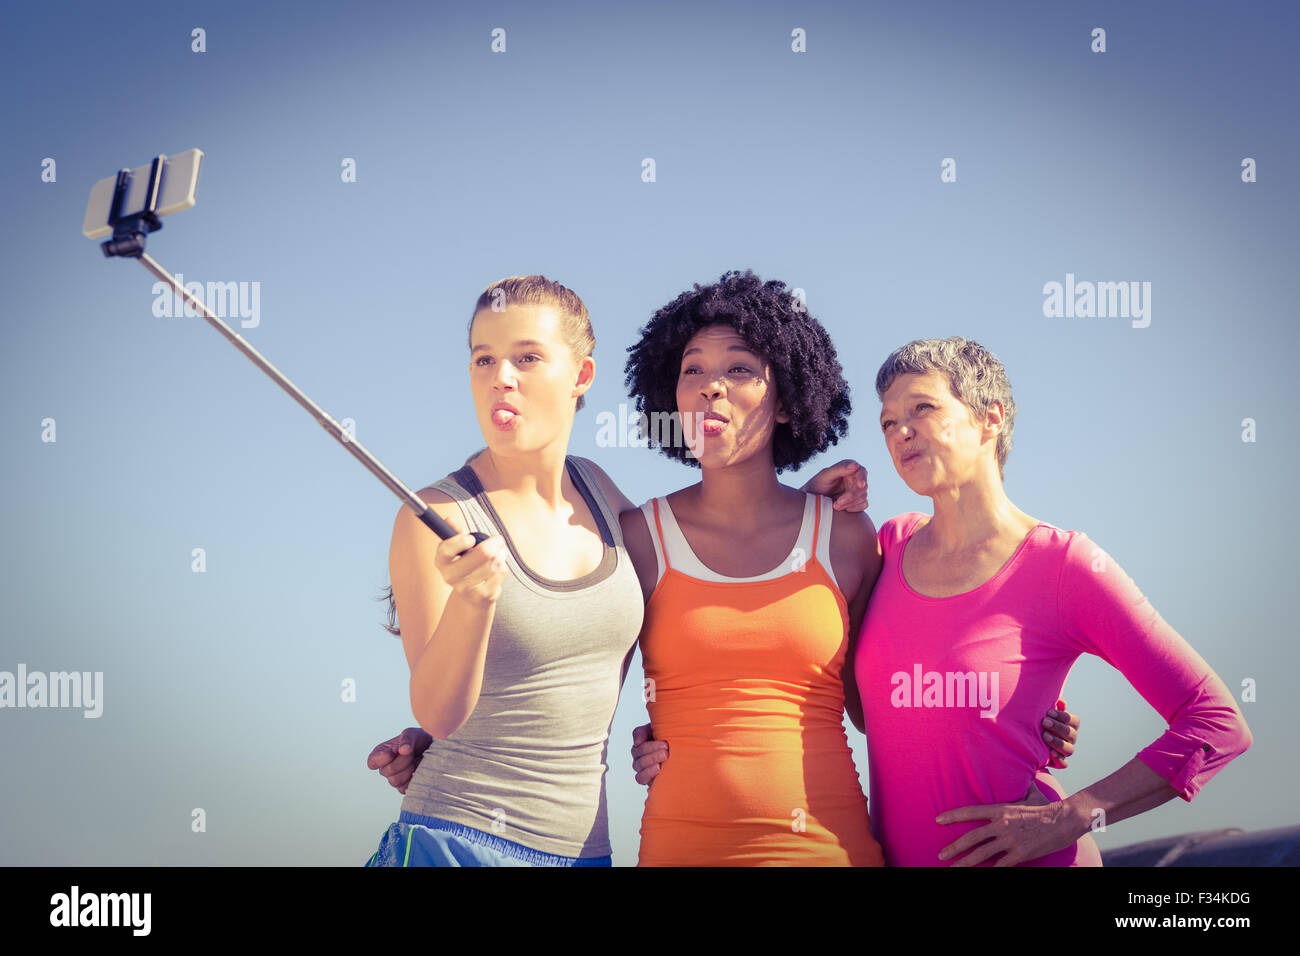 Sporty women posing and taking selfies with selfiestick Stock Photo